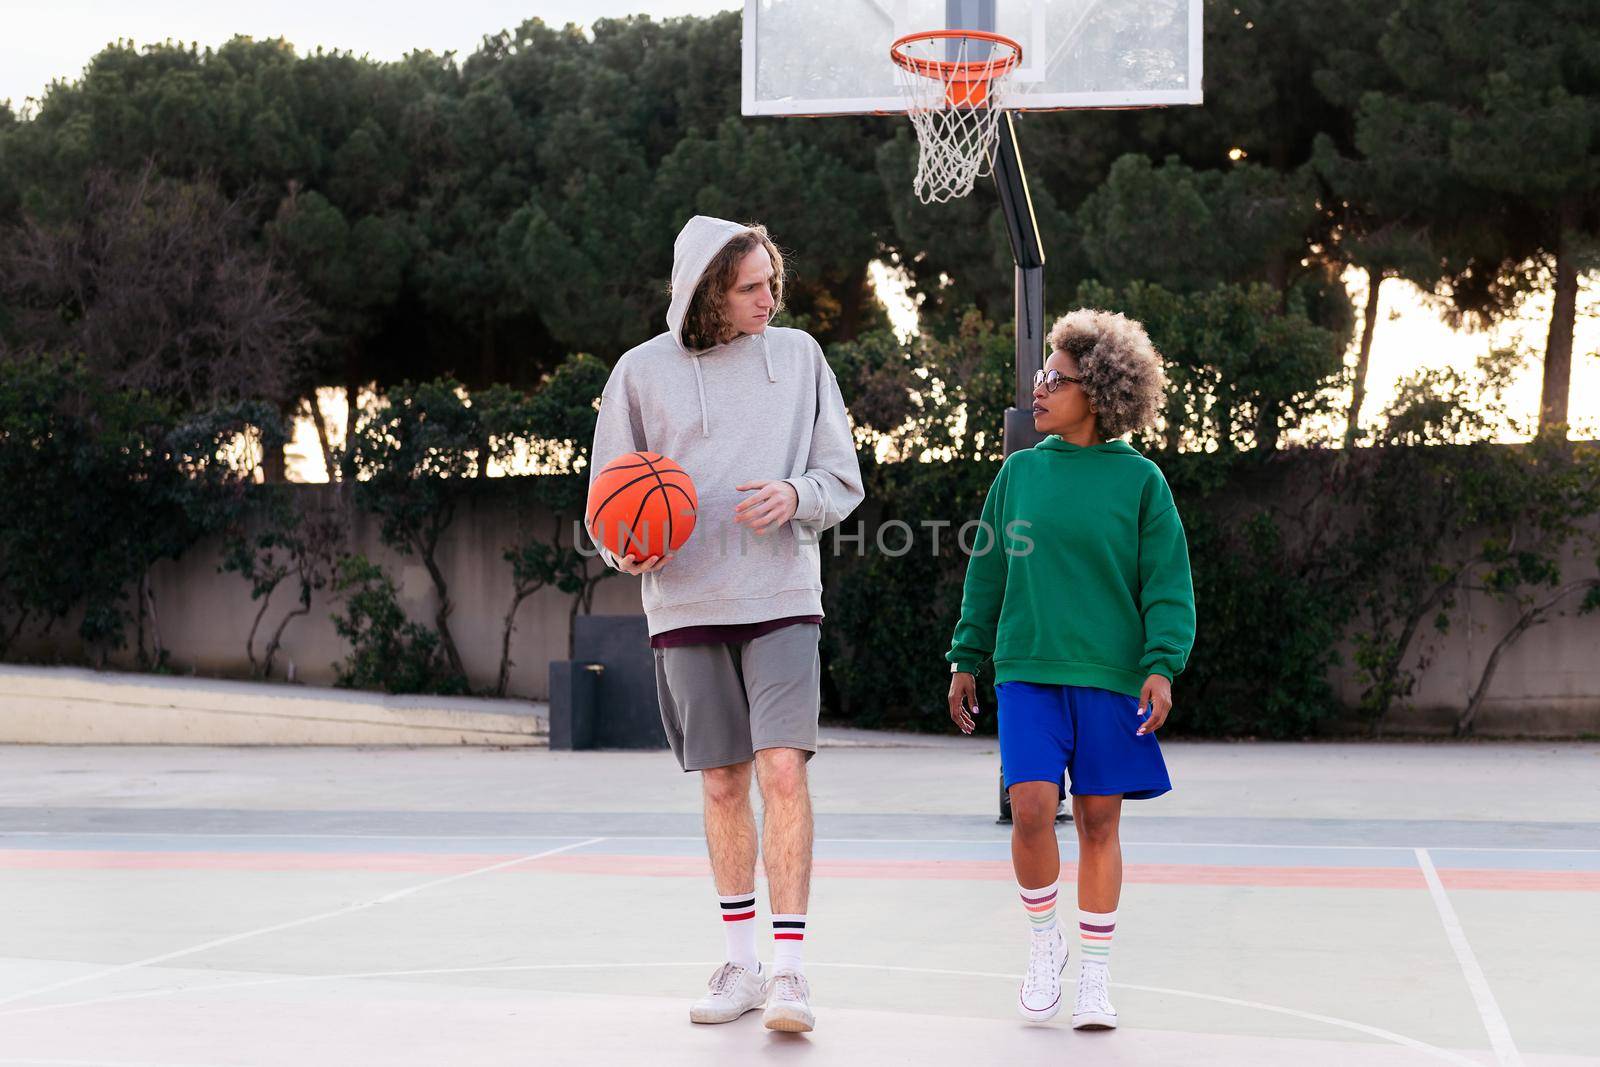 latin woman and caucasian man chatting while walking on the basketball court after a game, concept of friendship and urban sport in the street, copy space for text